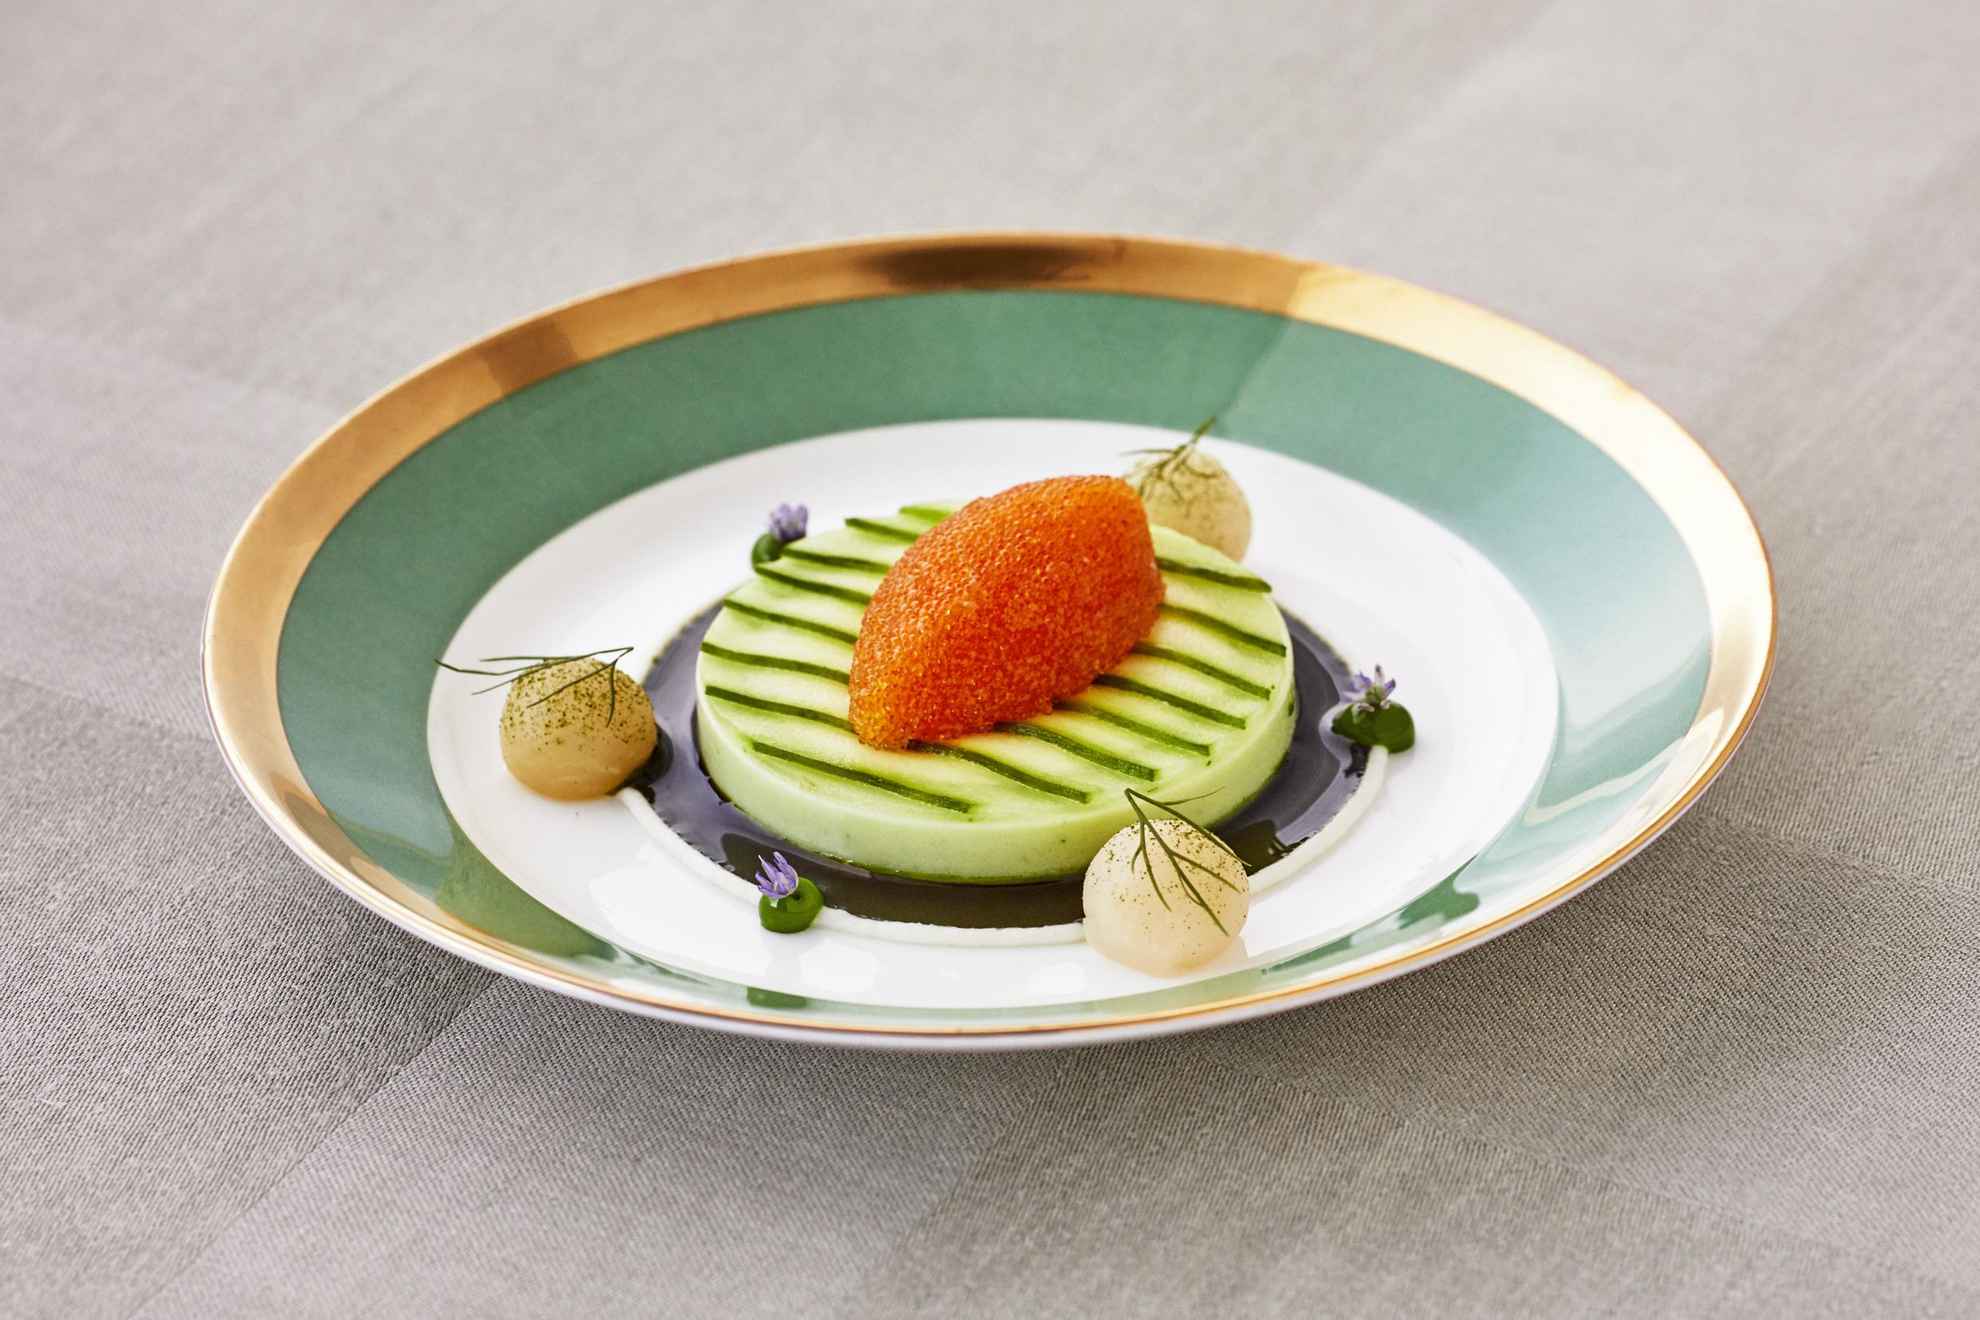 An entrée neatly laid out in a plate in white and green with a golden edge.